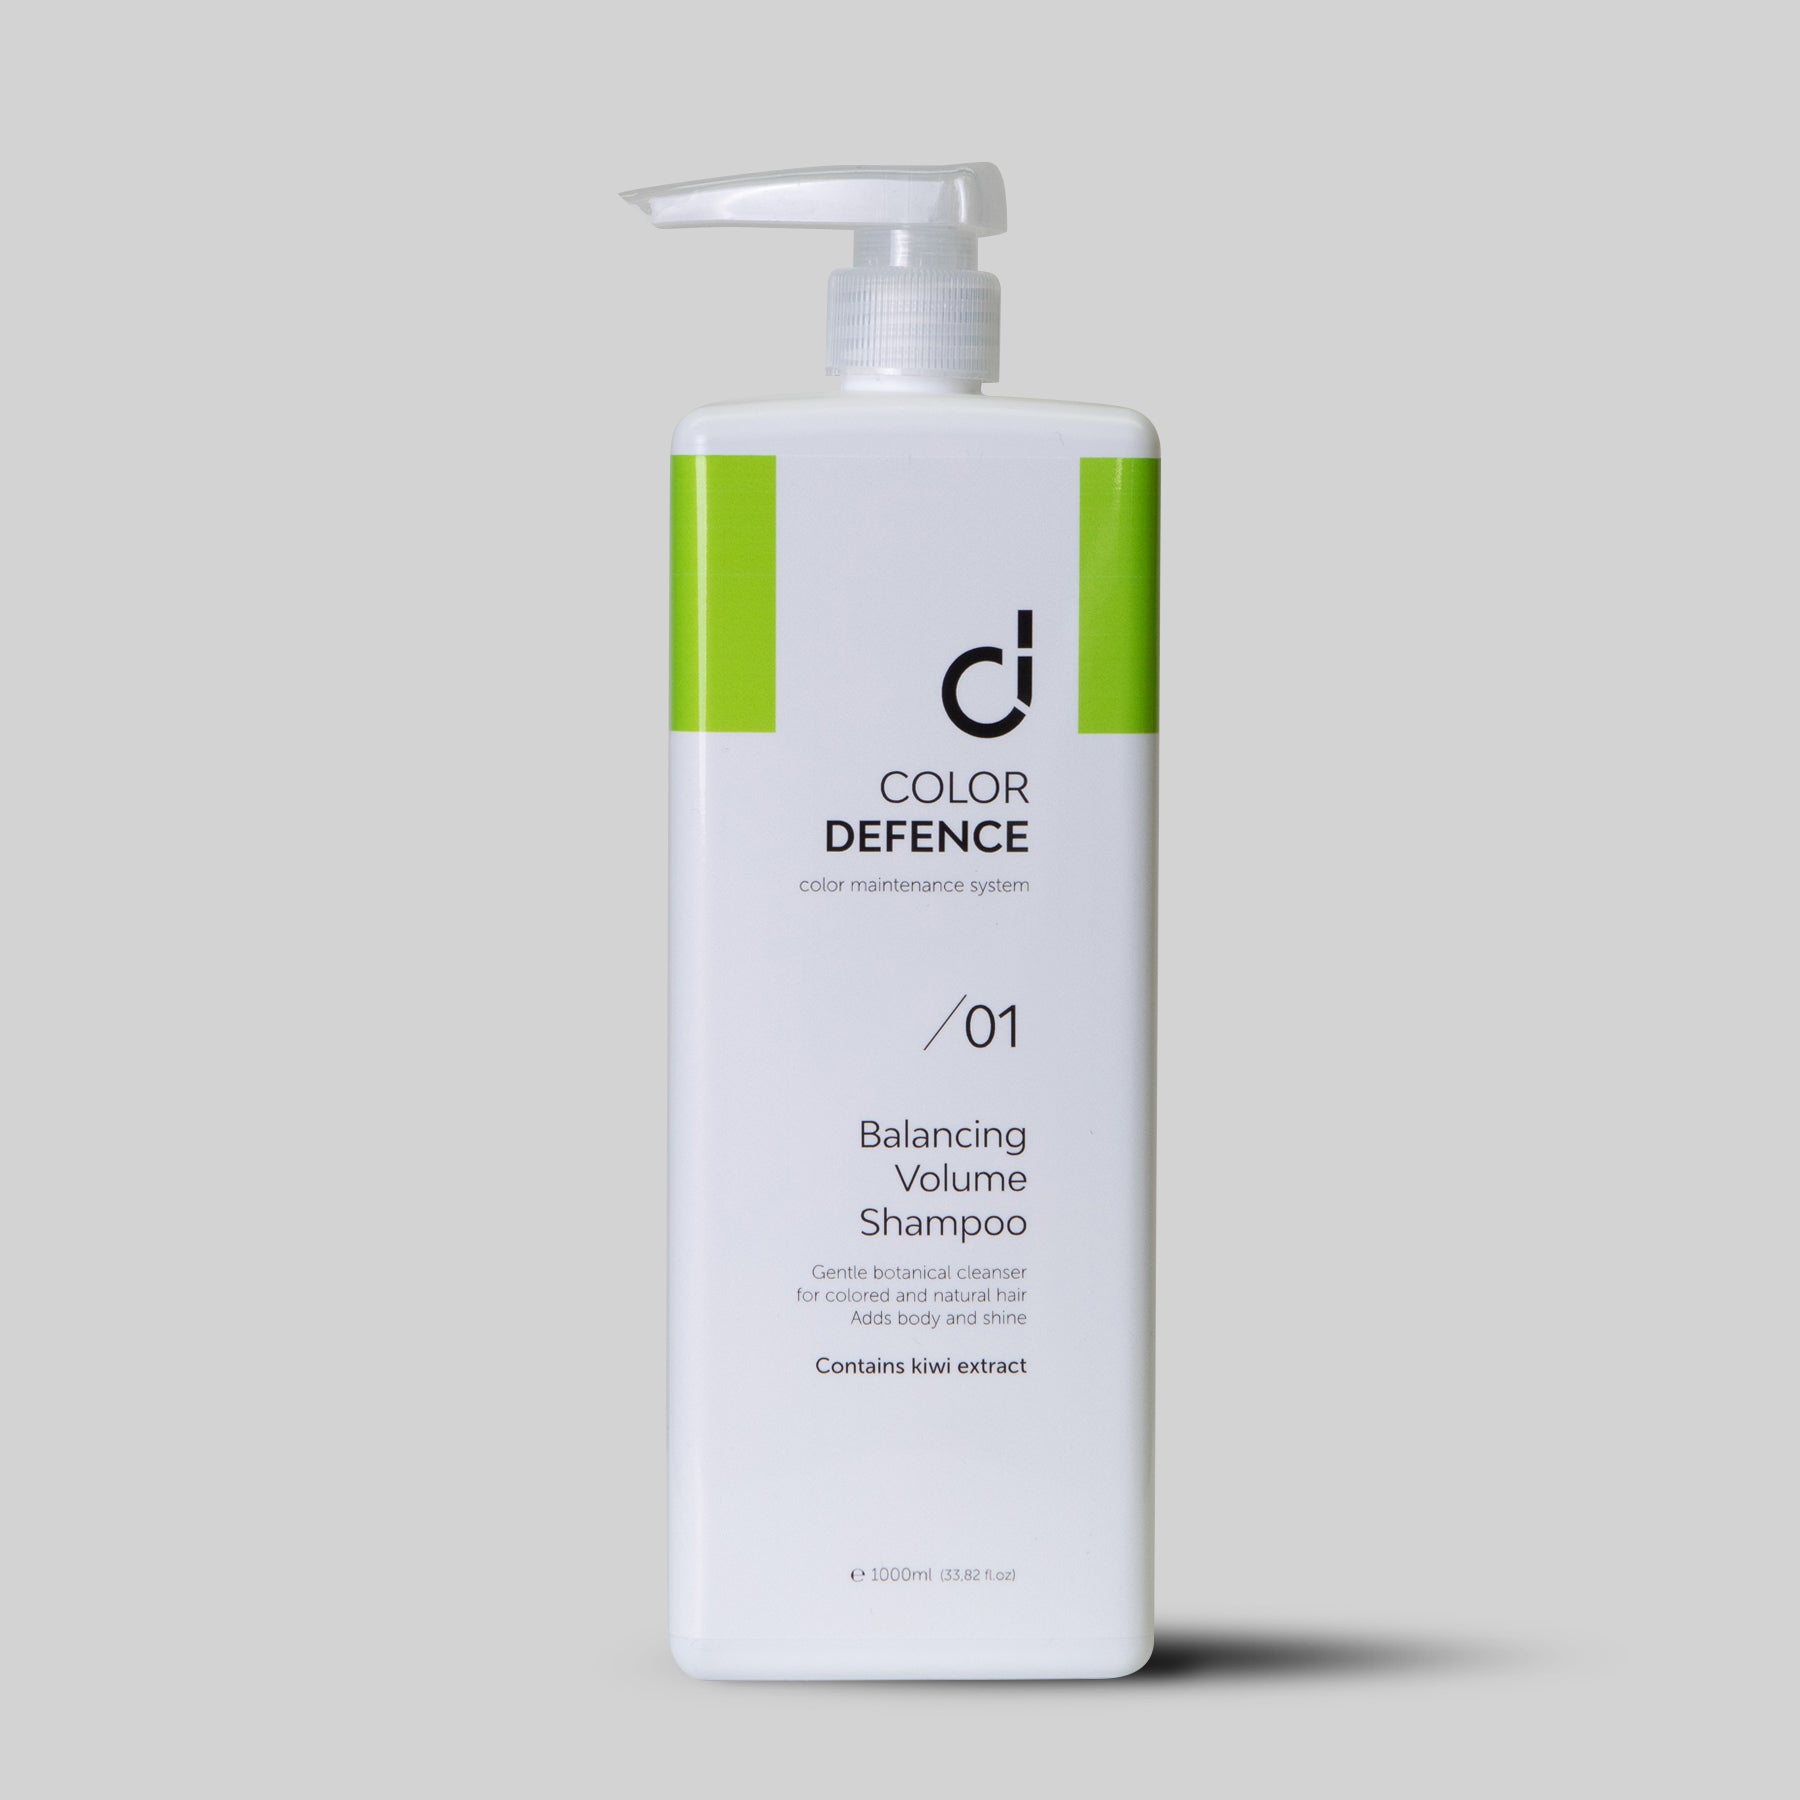 Colour Defence Balancing Volume Shampoo-Cleanses and prepares hair for our 3 step colour maintenance system. A gentle daily shampoo for natural & fine hair. Reduces oxidation, protects against free radical and environmental damage. A gentle botanical cleanser that adds body and shine.  Contains Kiwi Extract & Vitamin E.1234